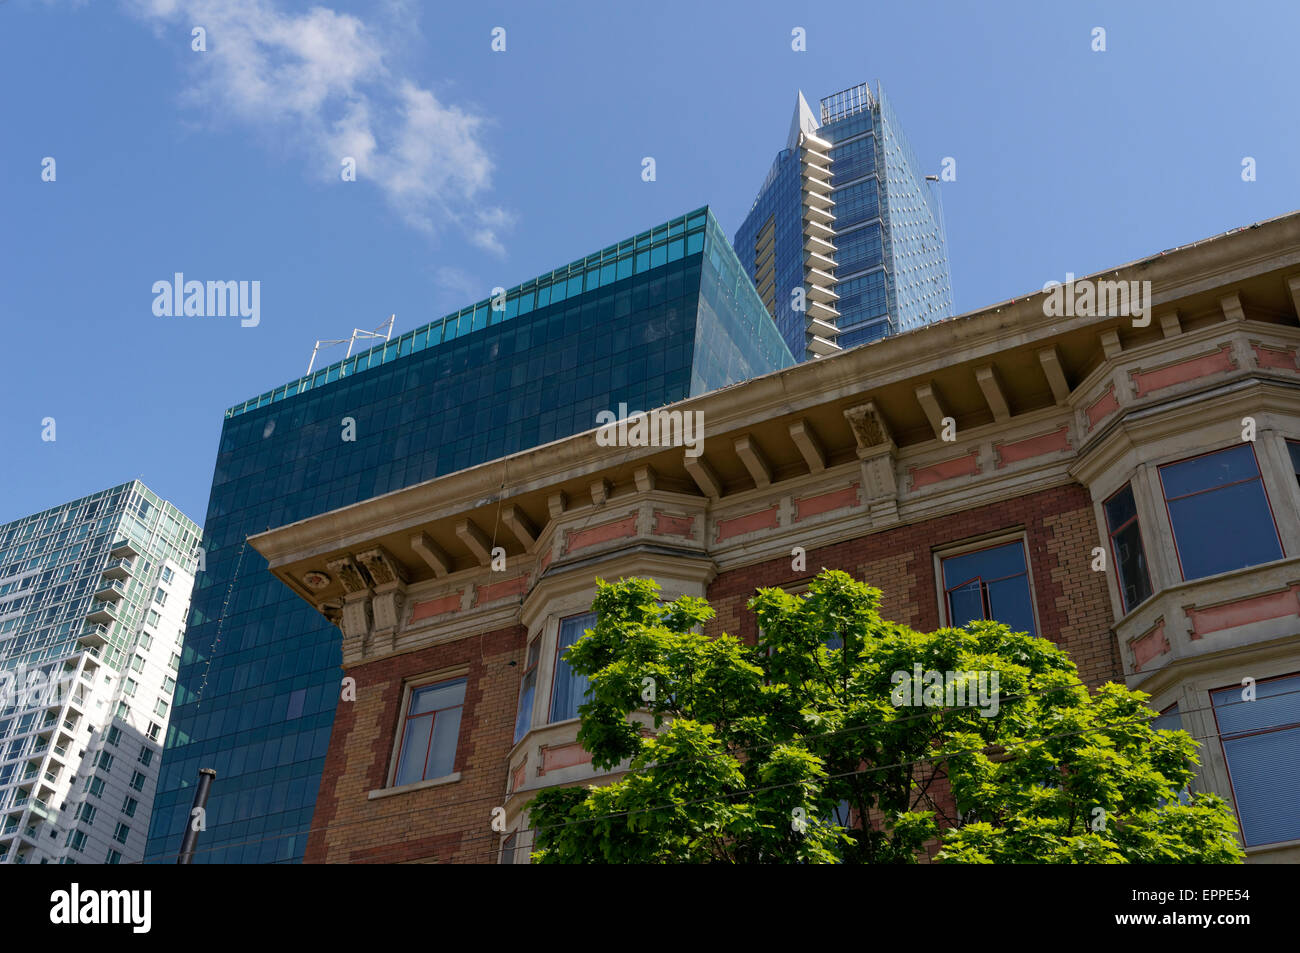 Contrasting old and new architecture on Robson Street in downtown Vancouver, BC, Canada Stock Photo